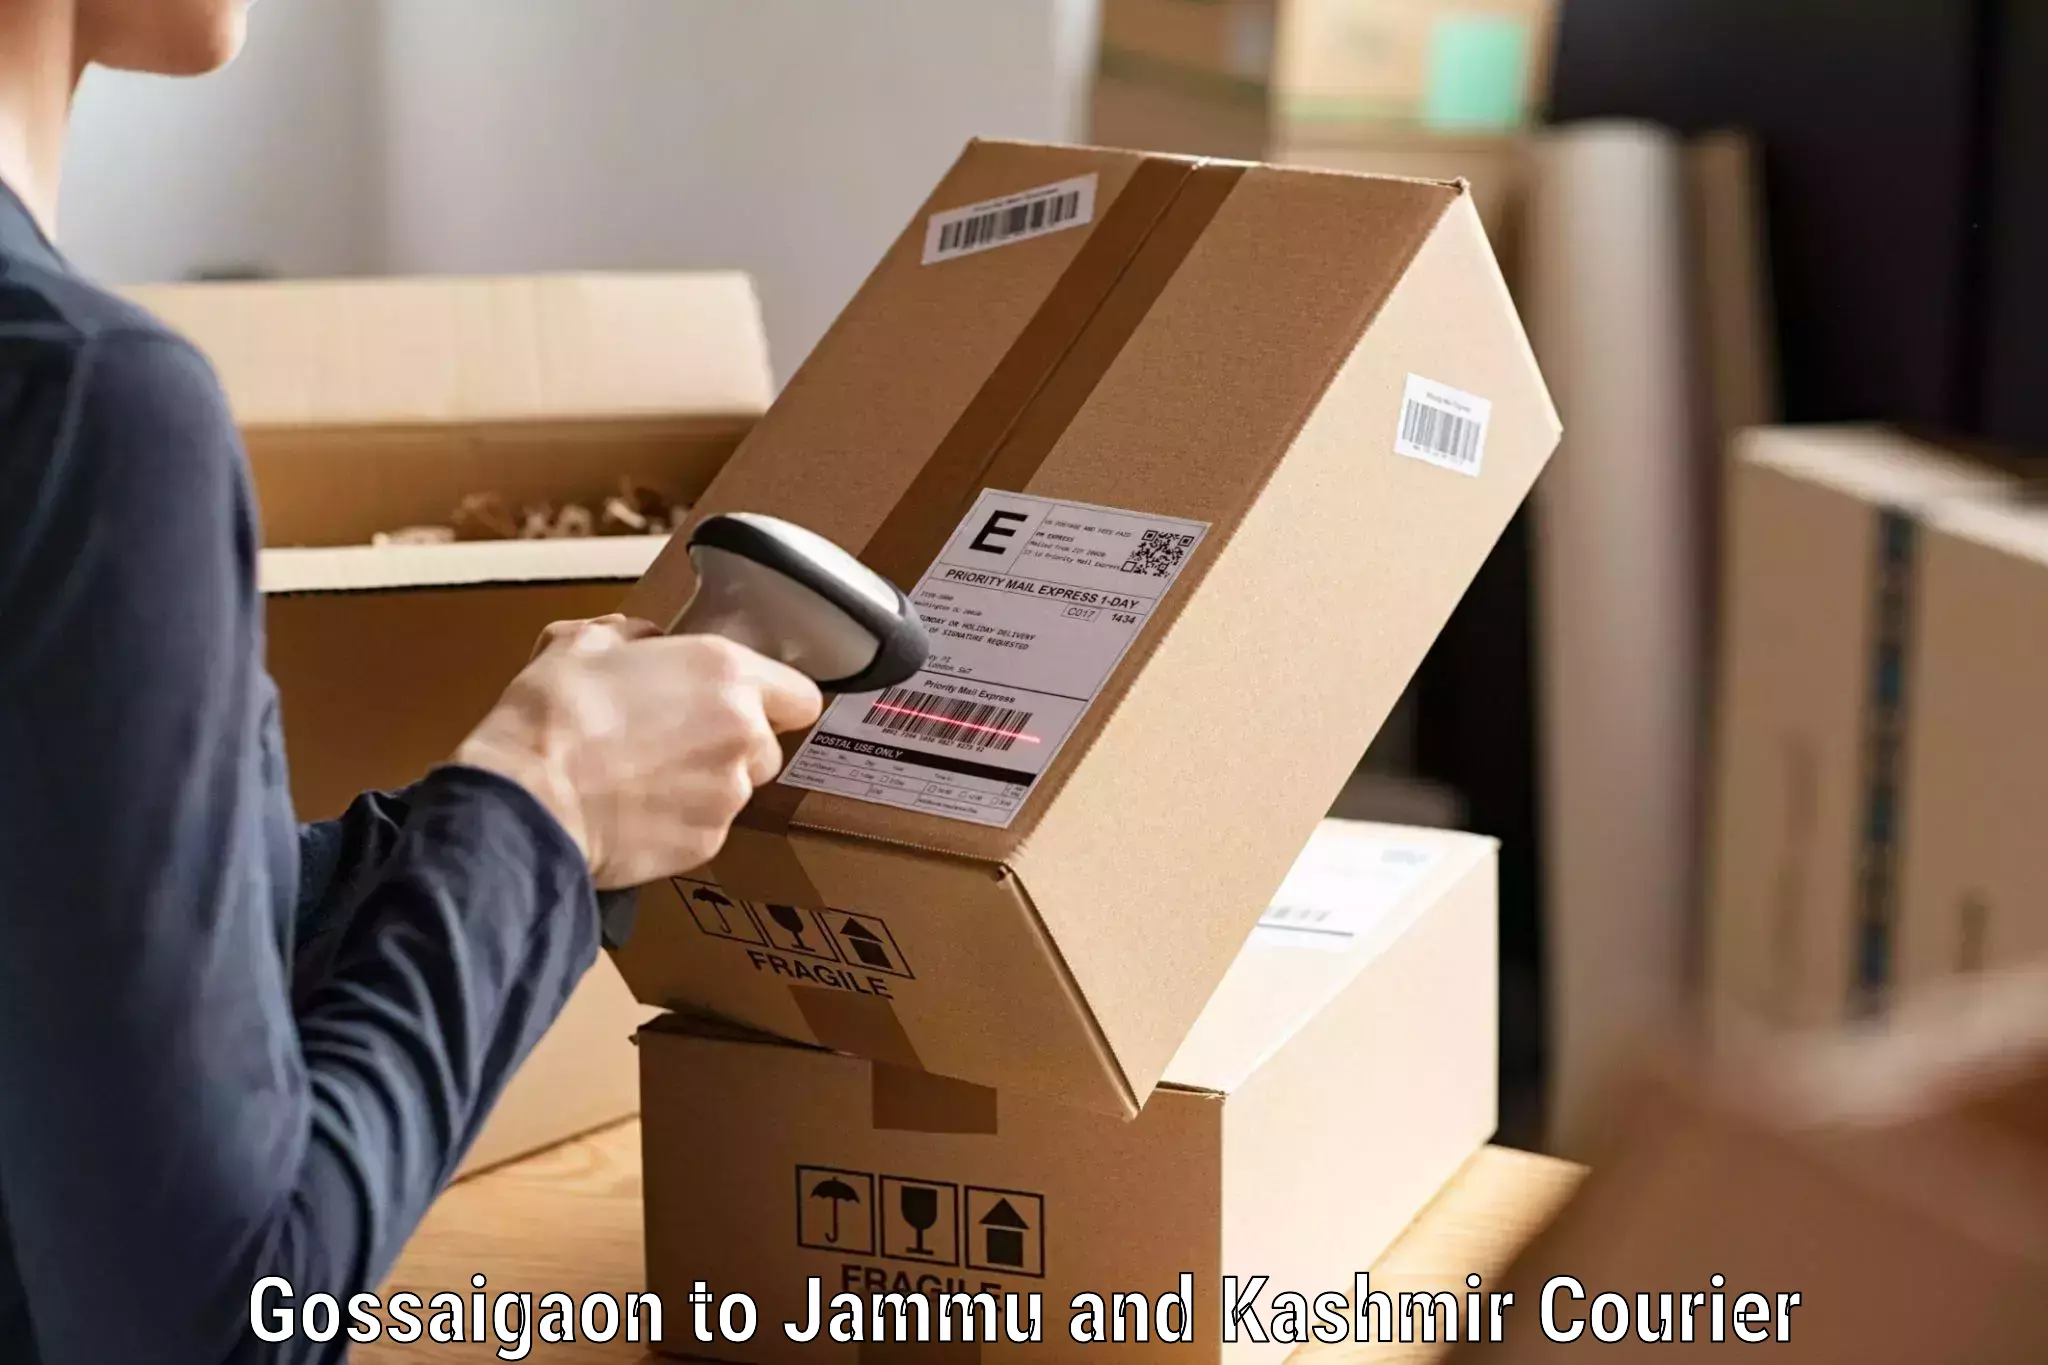 Parcel handling and care in Gossaigaon to Jammu